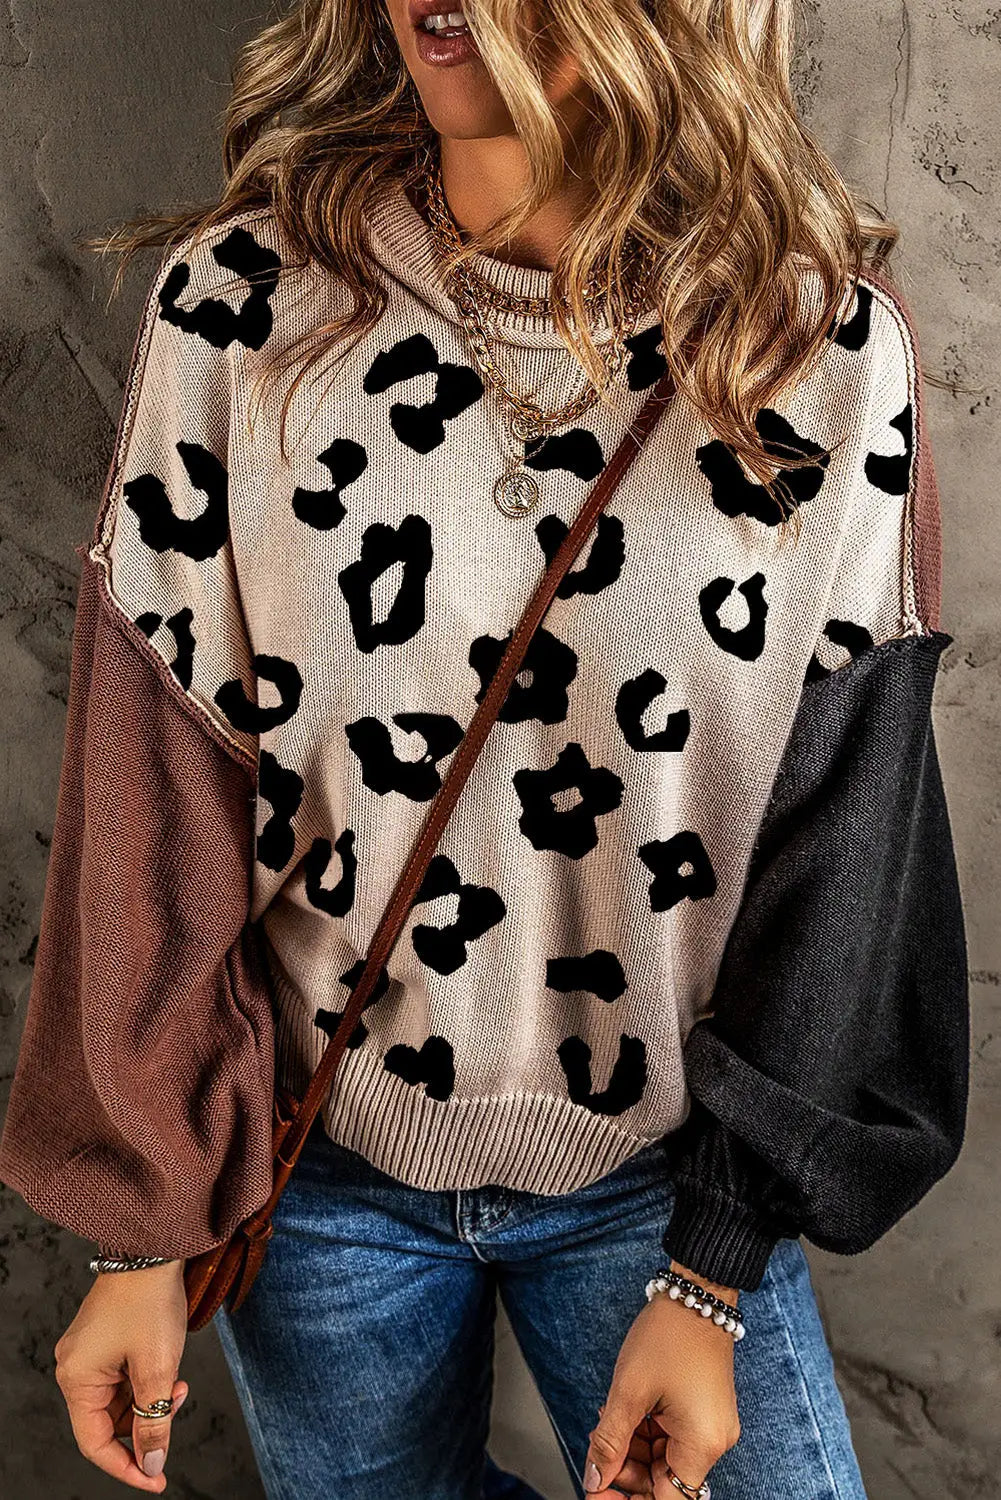 Chicory coffee contrast color exposed seam drop shoulder sweater - coffee1 / s / 55% acrylic + 45% cotton - tops